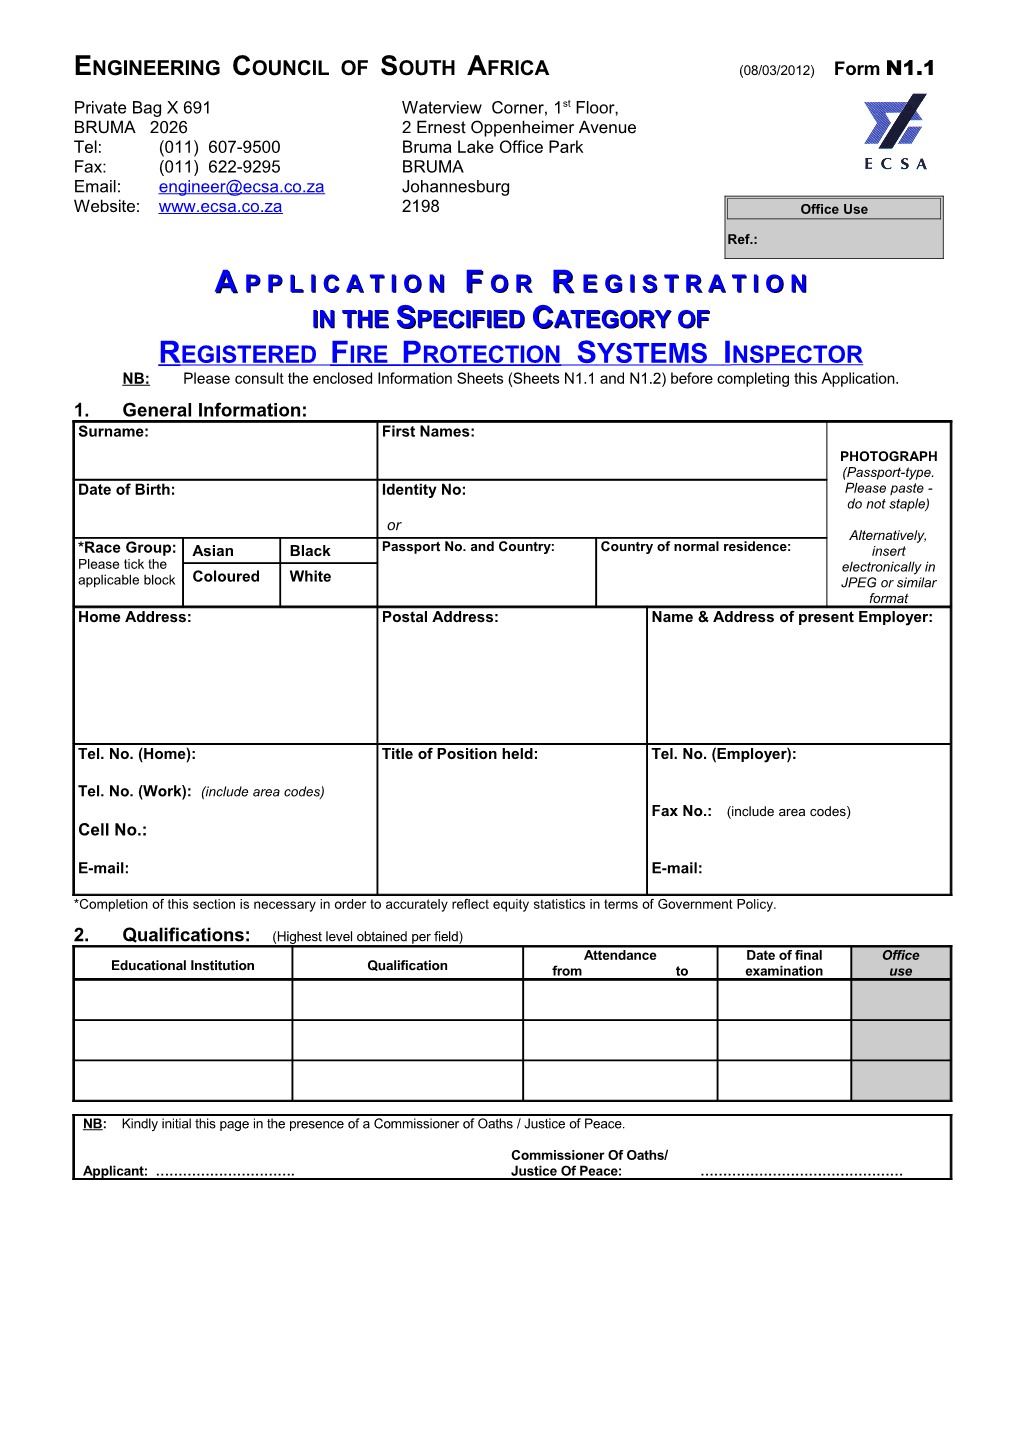 ENGINEERING COUNCIL of SOUTH AFRICA(08/03/2012) Form N1.1